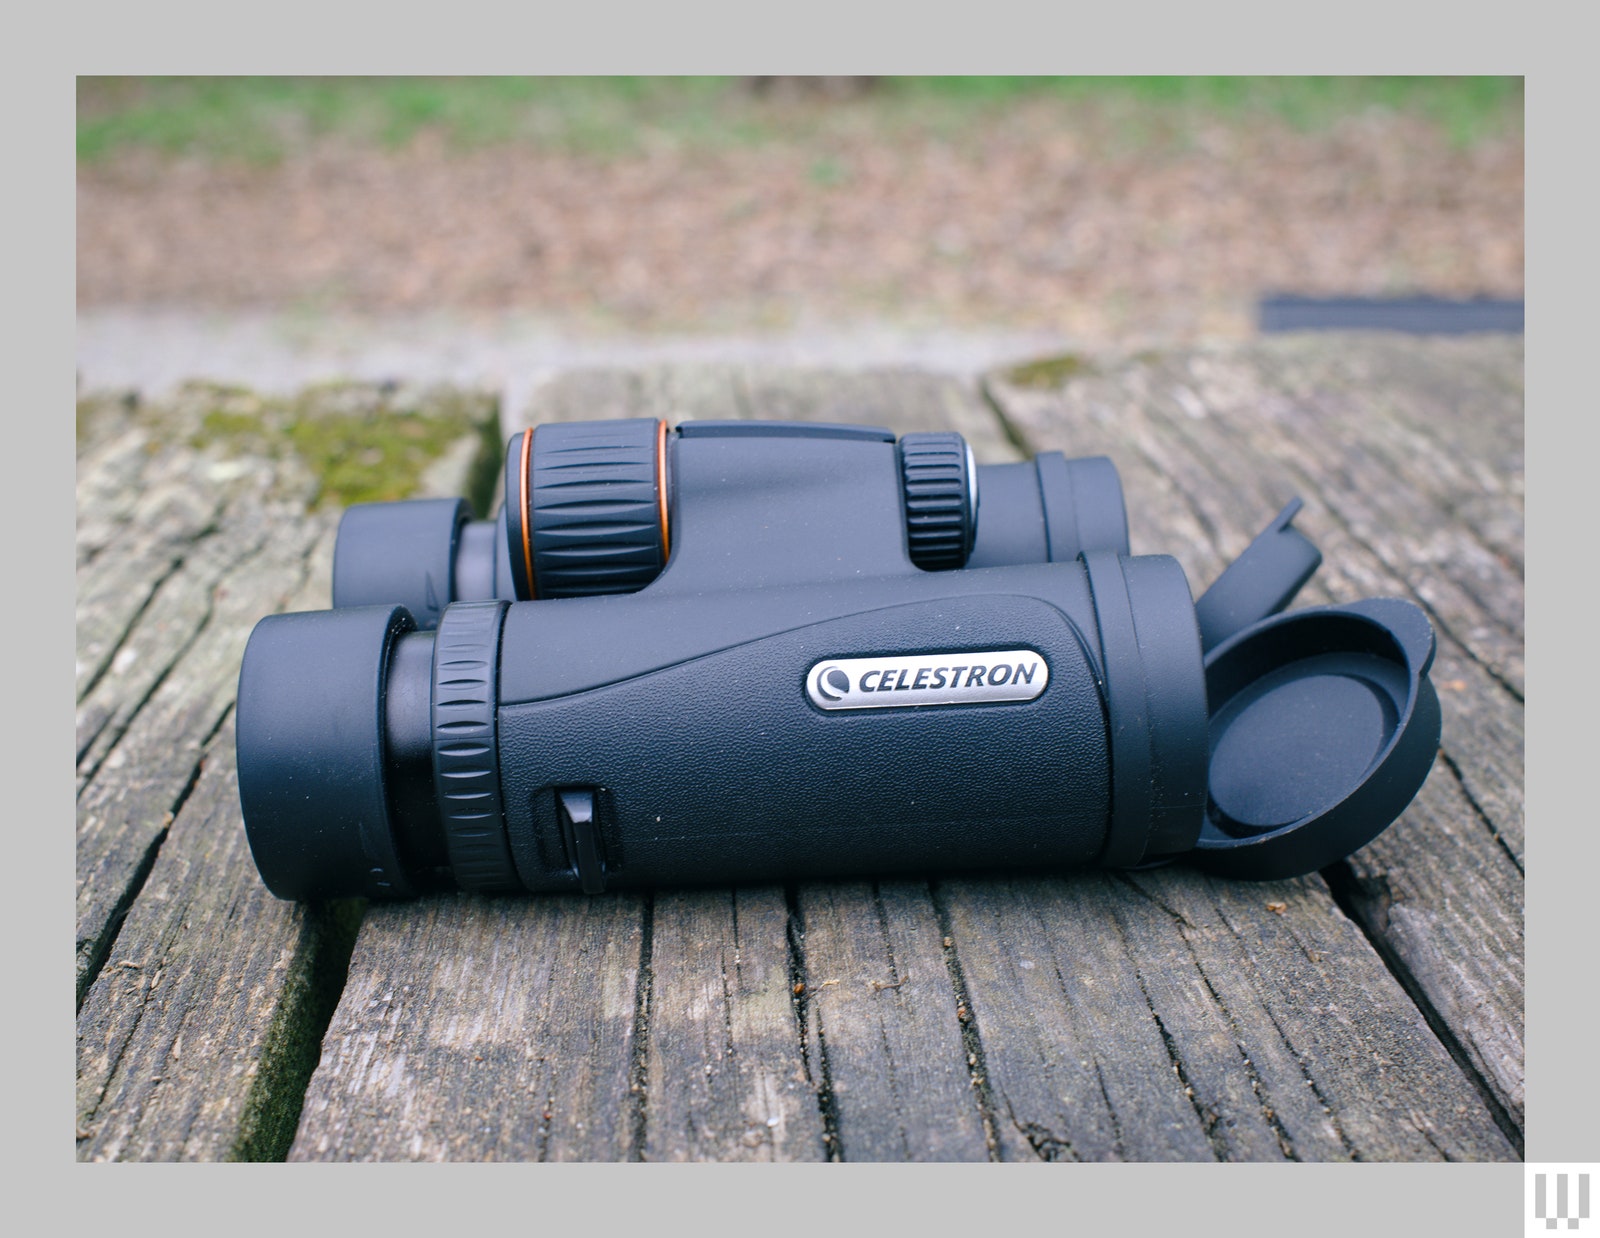 Side view of a pair of black binoculars with the lens caps partially loose, sitting on a wooden surface with dry leaves in the background